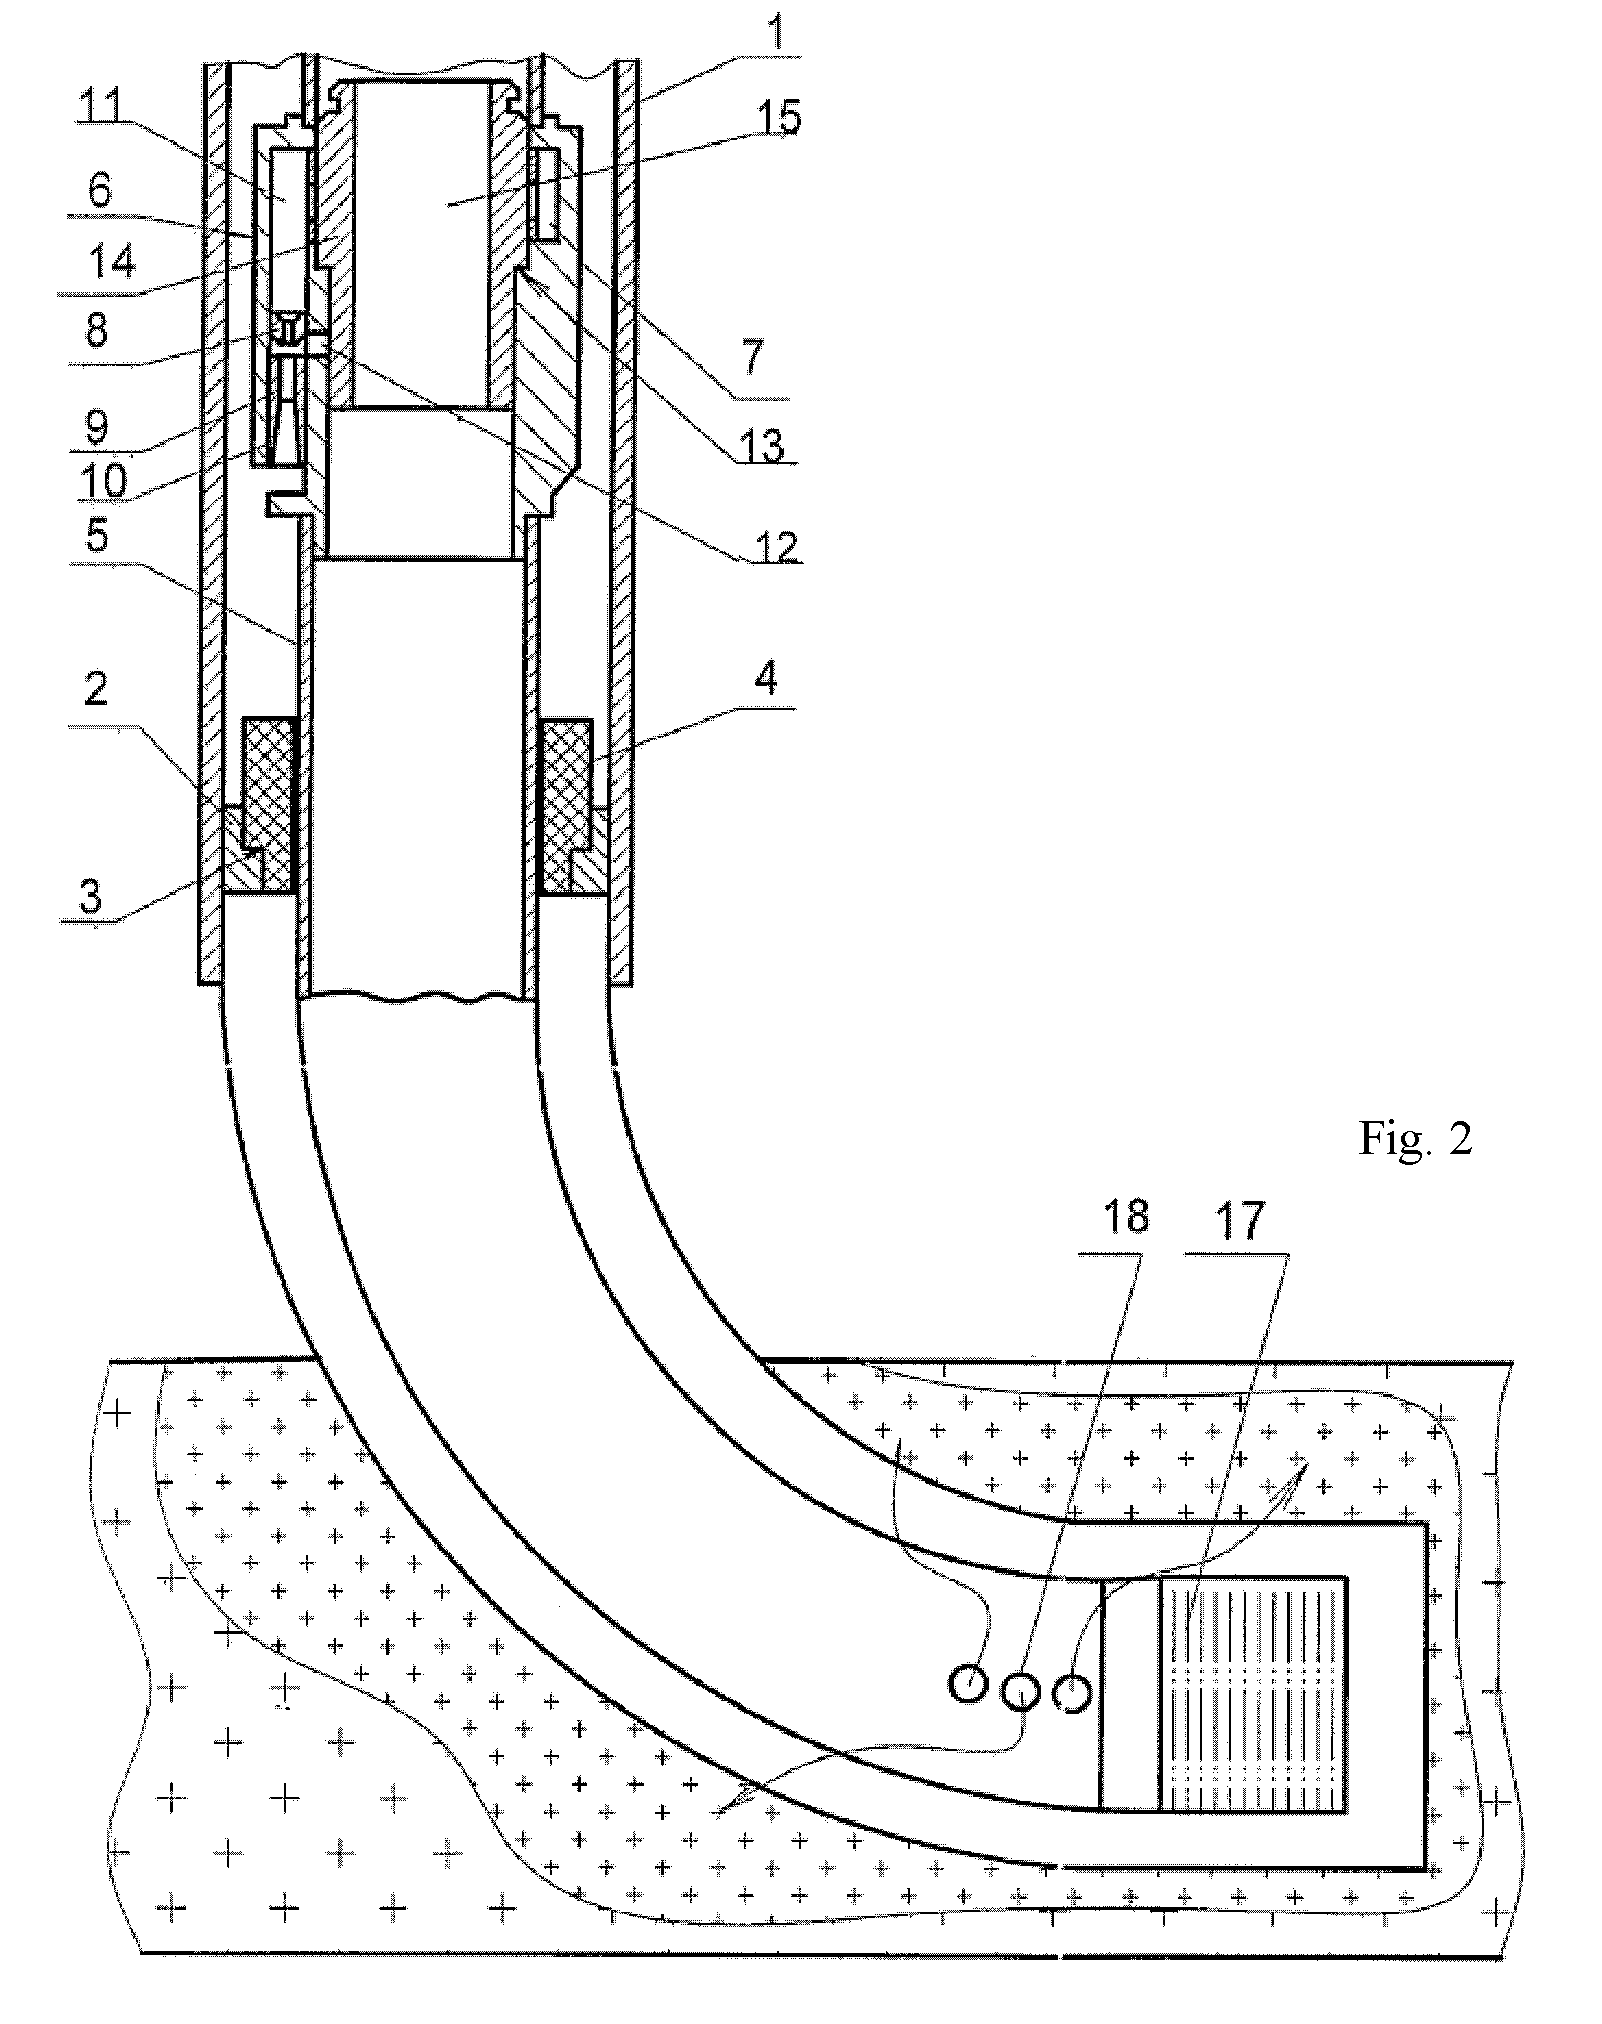 Well jet device for logging horizontal wells and the operating method thereof